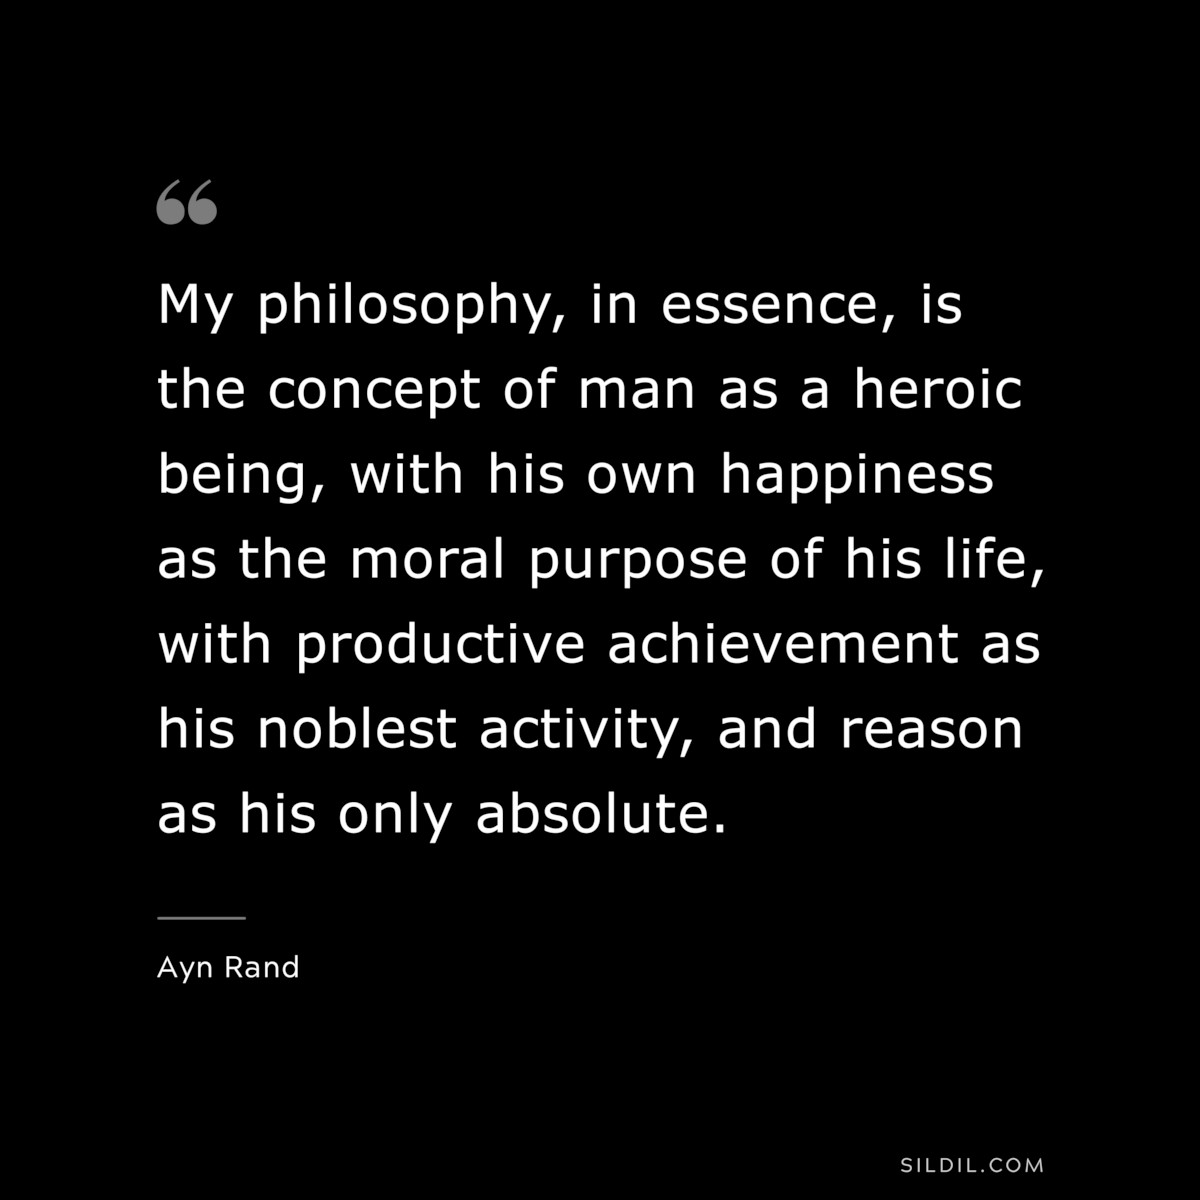 My philosophy, in essence, is the concept of man as a heroic being, with his own happiness as the moral purpose of his life, with productive achievement as his noblest activity, and reason as his only absolute. ― Ayn Rand